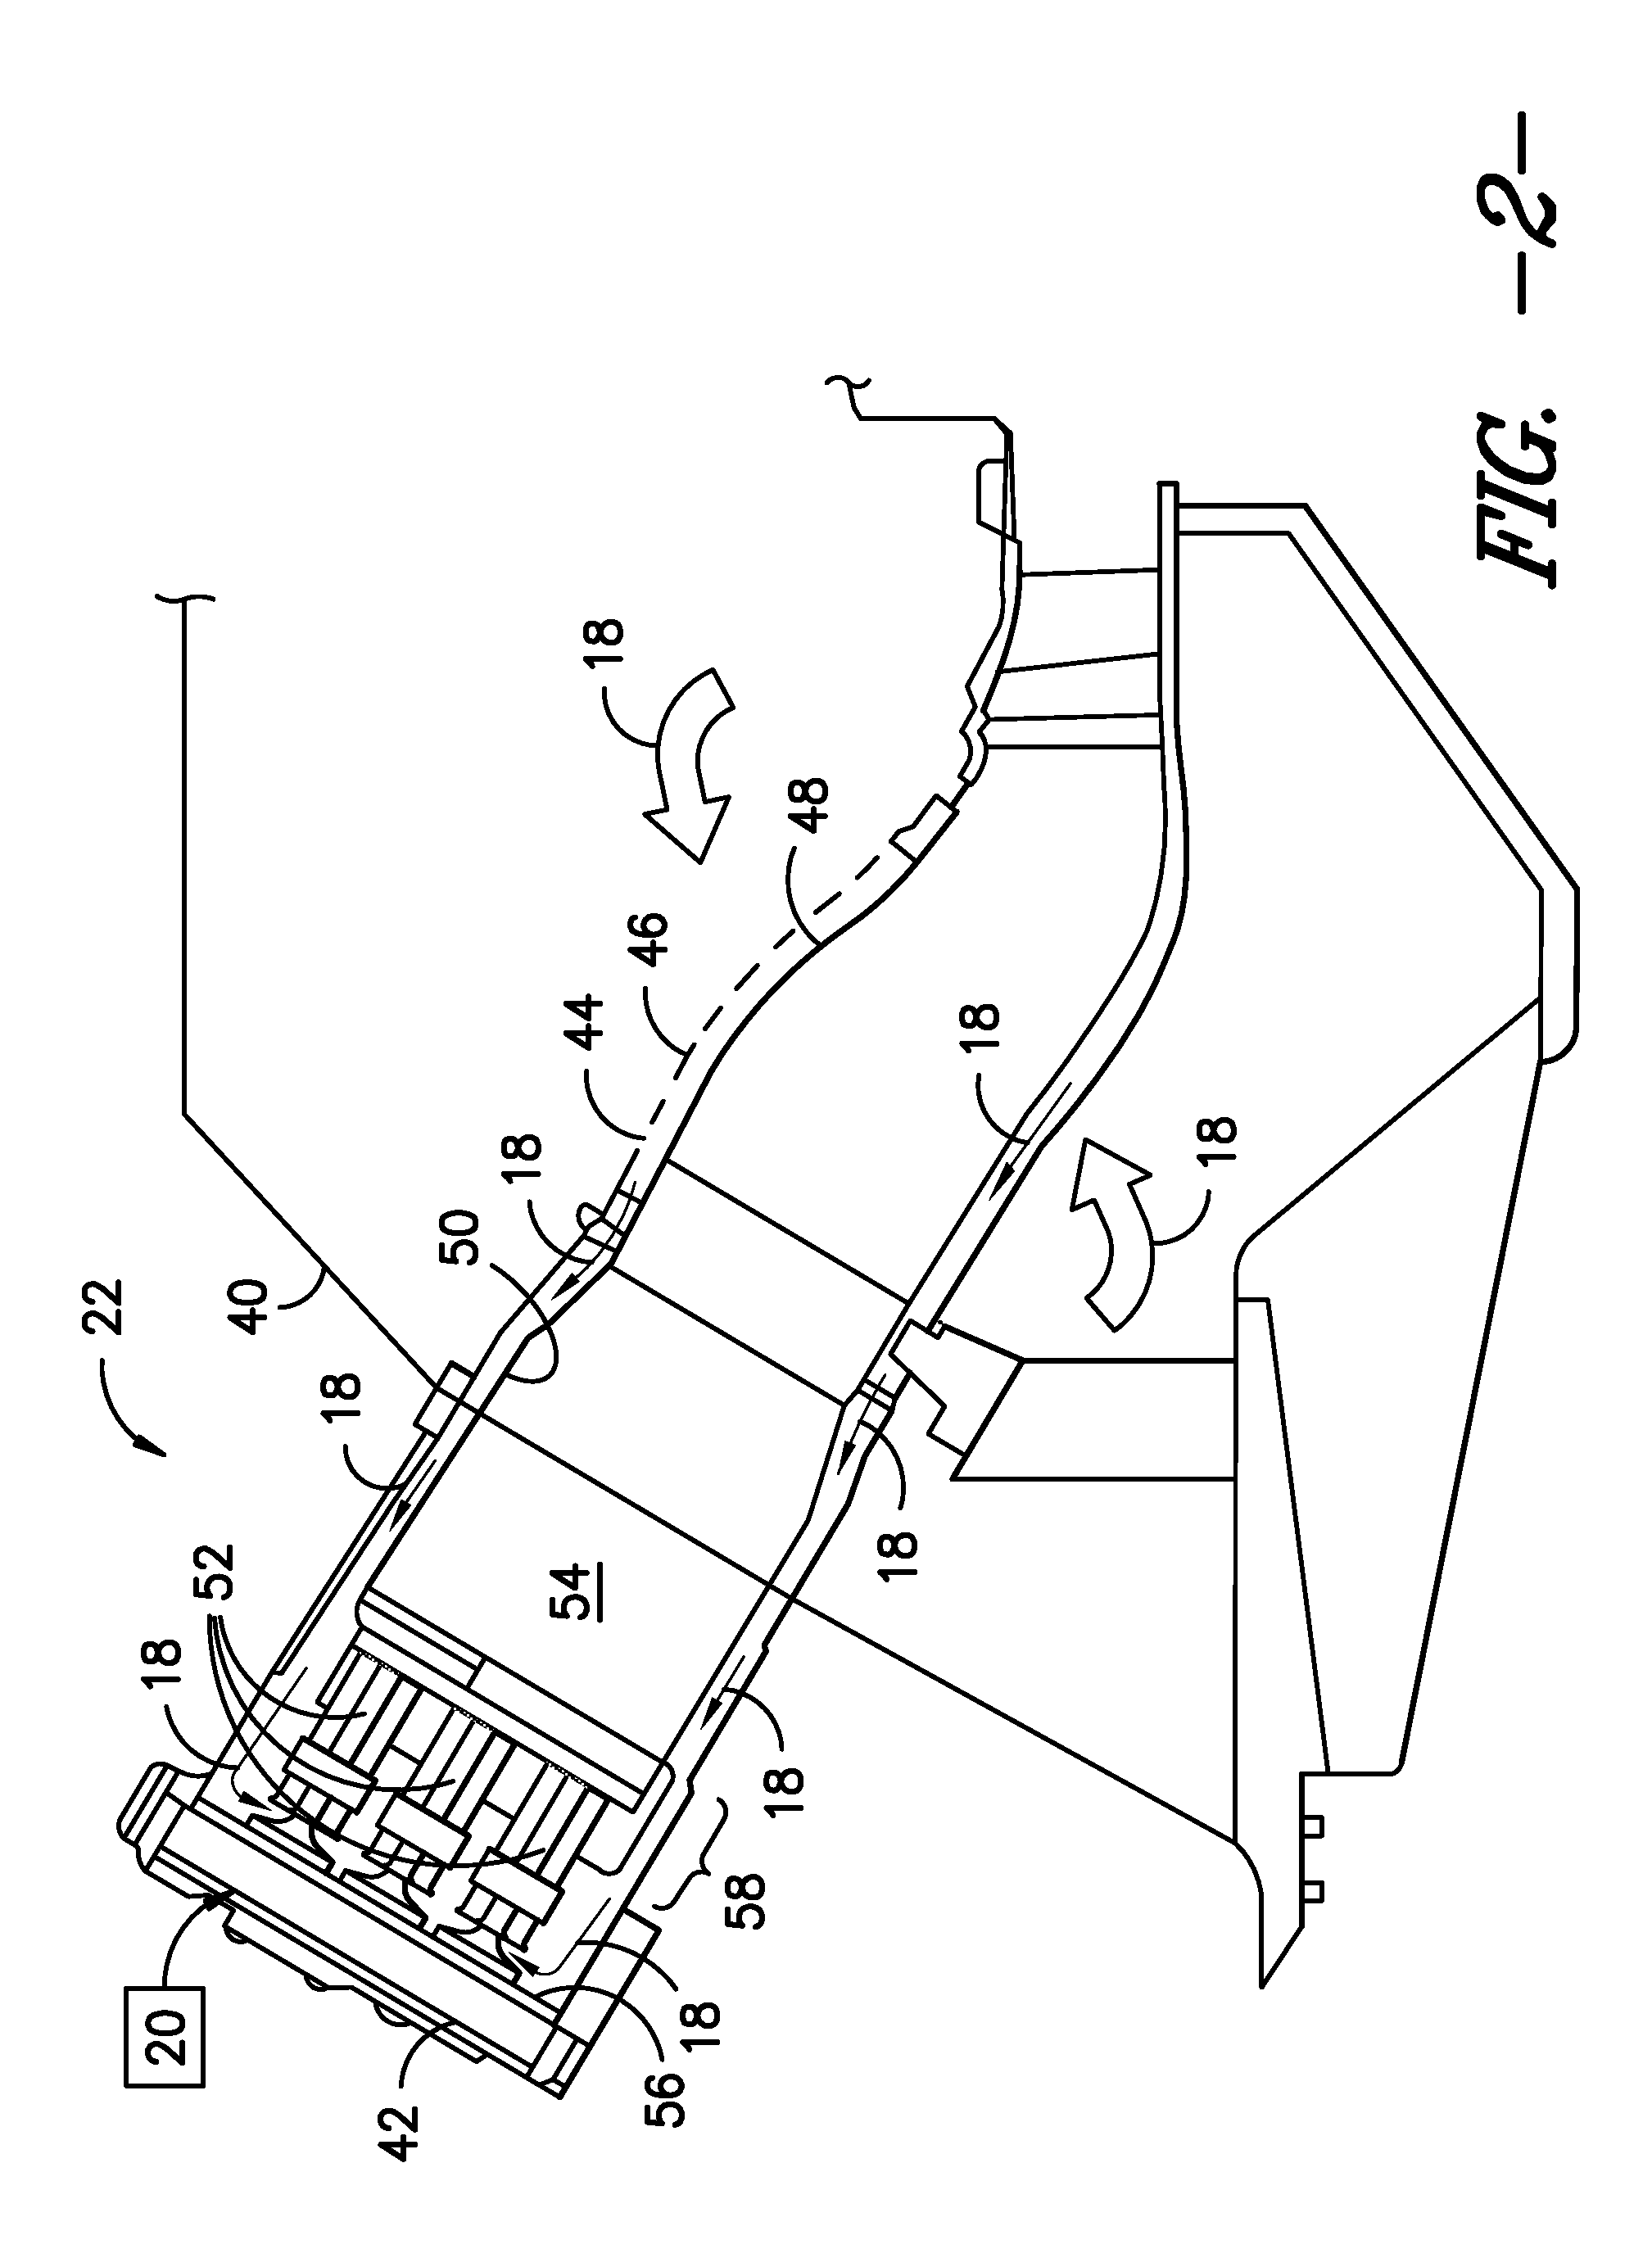 Fuel nozzle for a combustor of a gas turbine engine